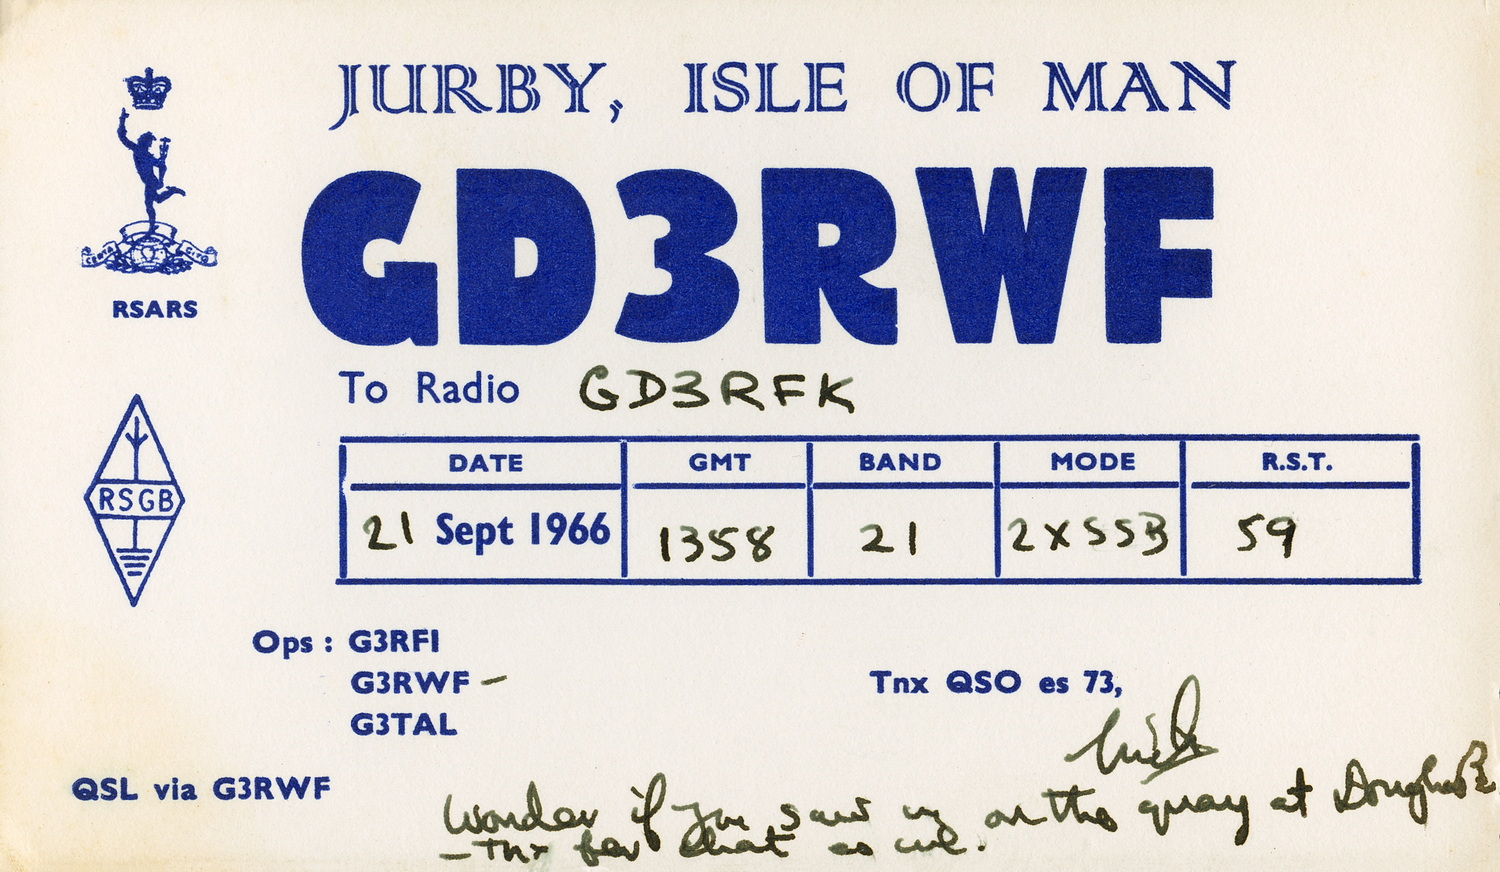 GD3RWF with a very local QSO on 21st September 1966 on 21 Meters SSB